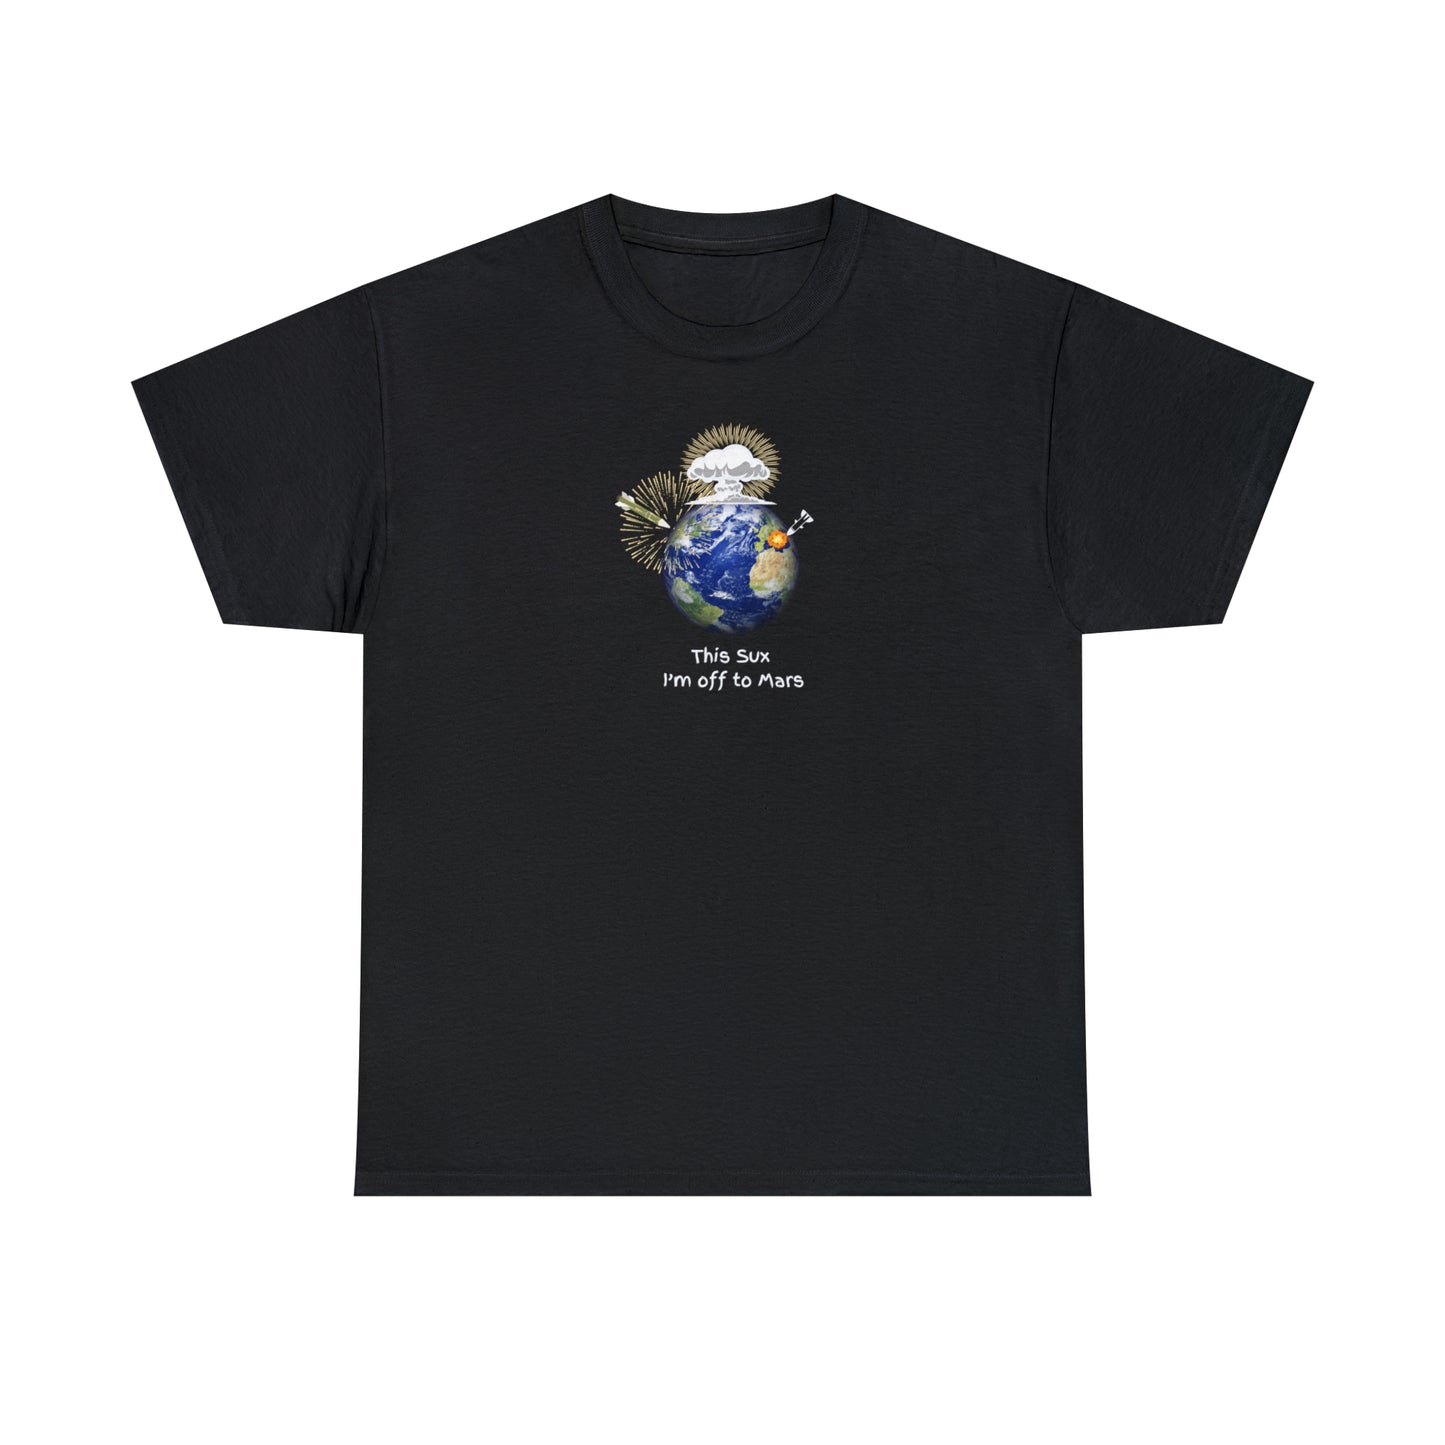 Unisex Heavy Cotton Tee - This Sux I'm off to Mars